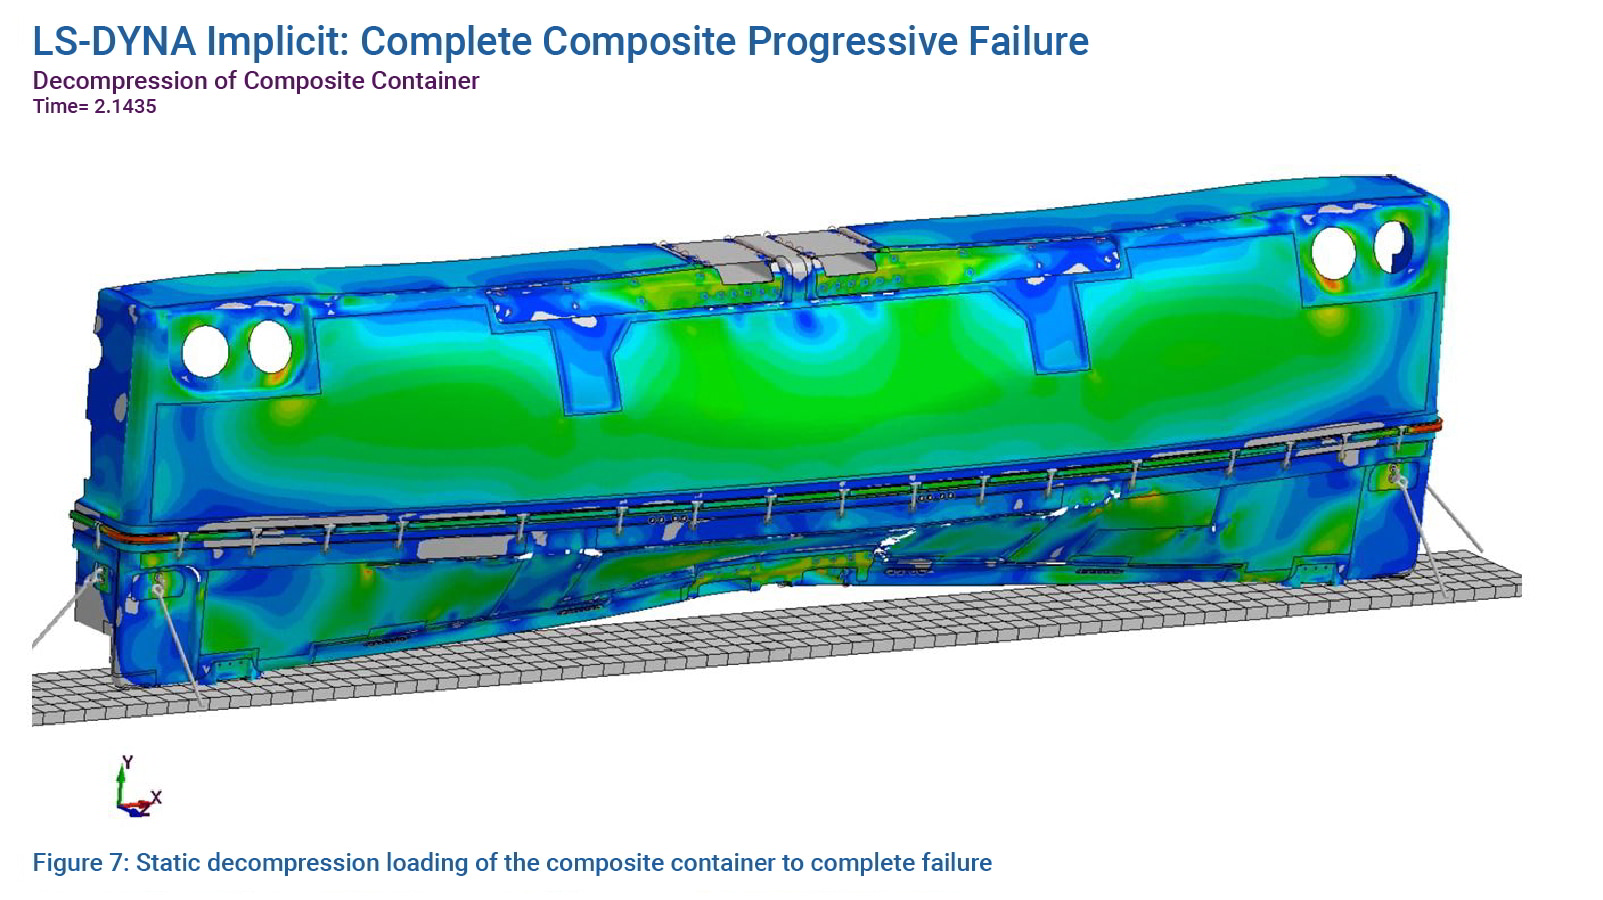 Figure 7: Static decompression loading of the composite container to complete failure